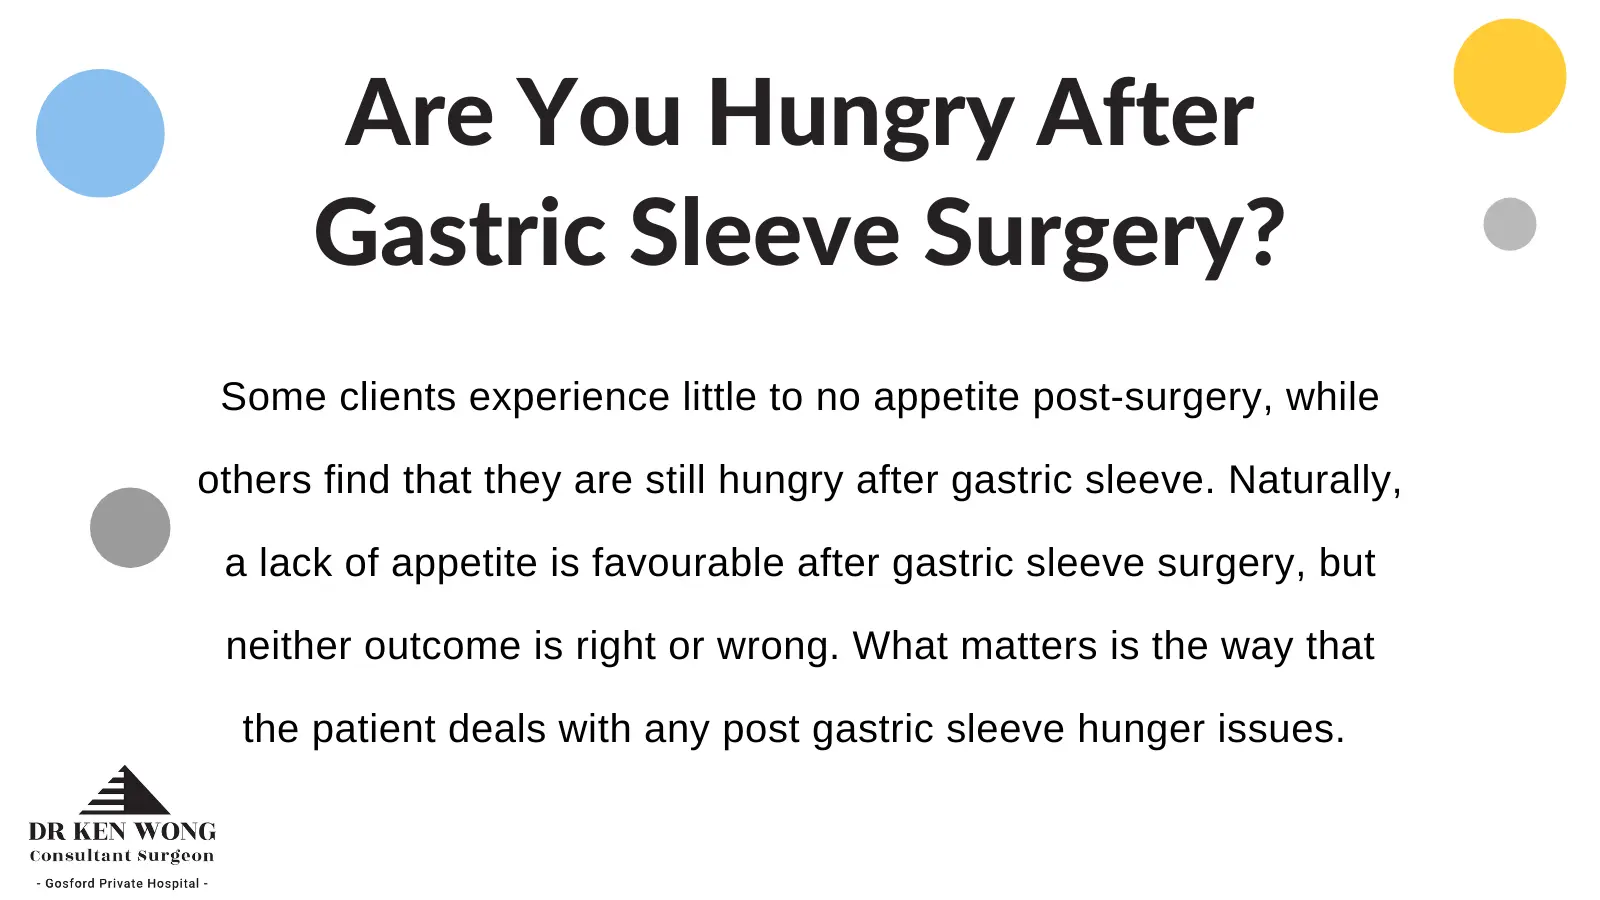 Are you hungry after gastric sleeve surgery infographic